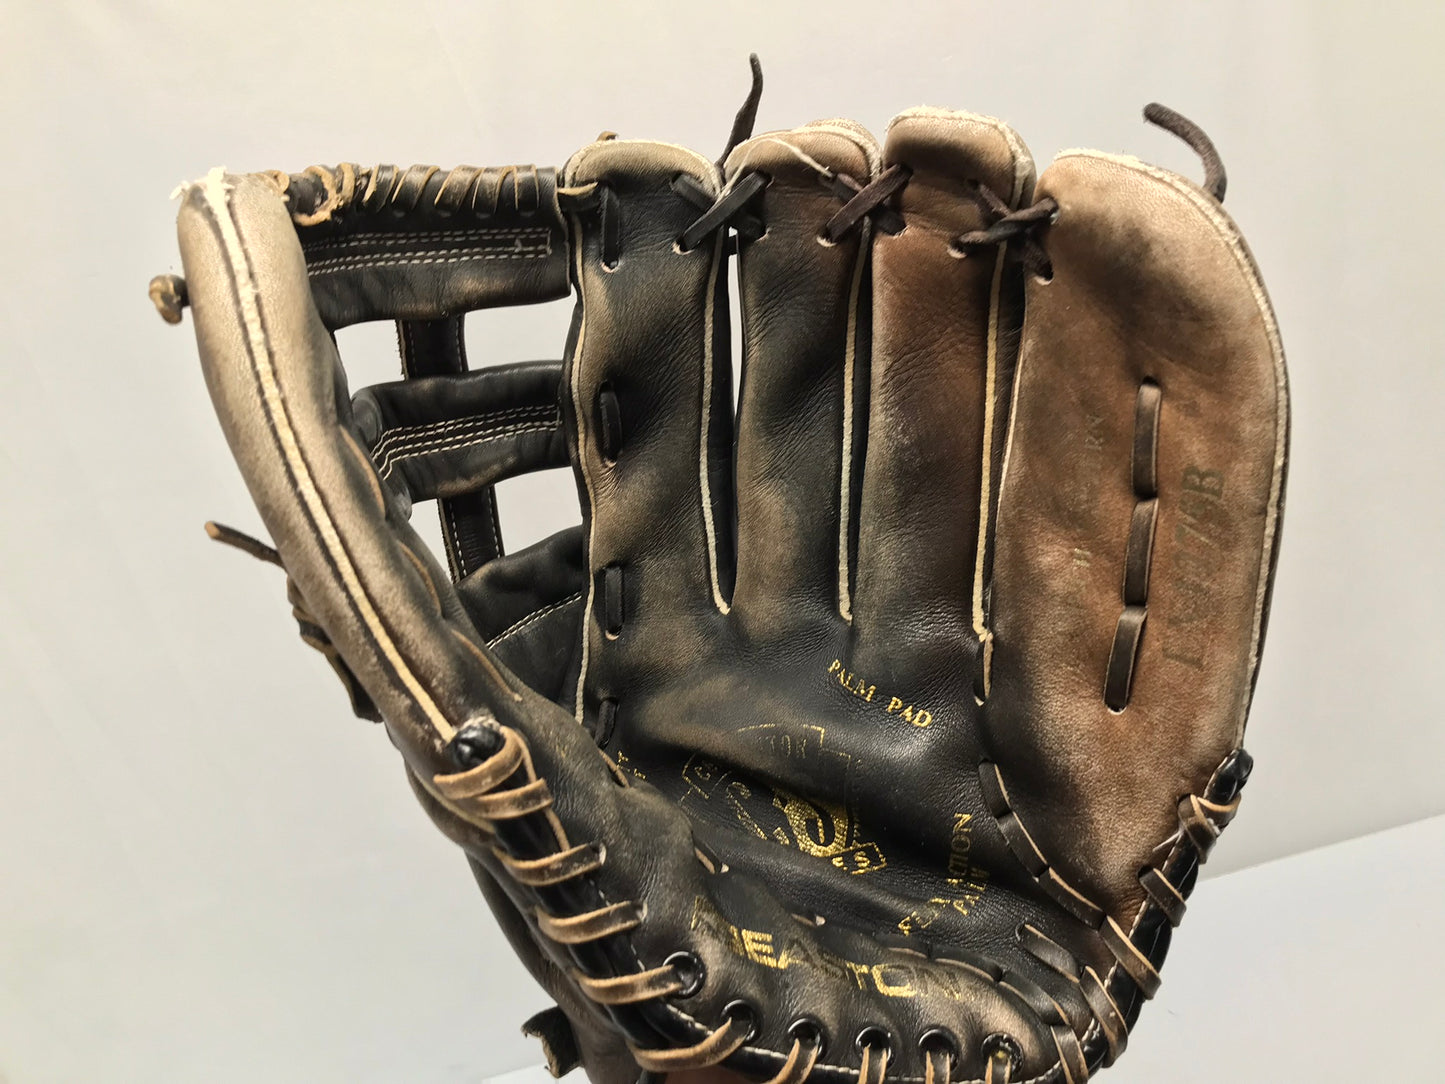 Baseball Glove Adult Size 12.5 inch Easton Leather Brown Black Fits Left Hand